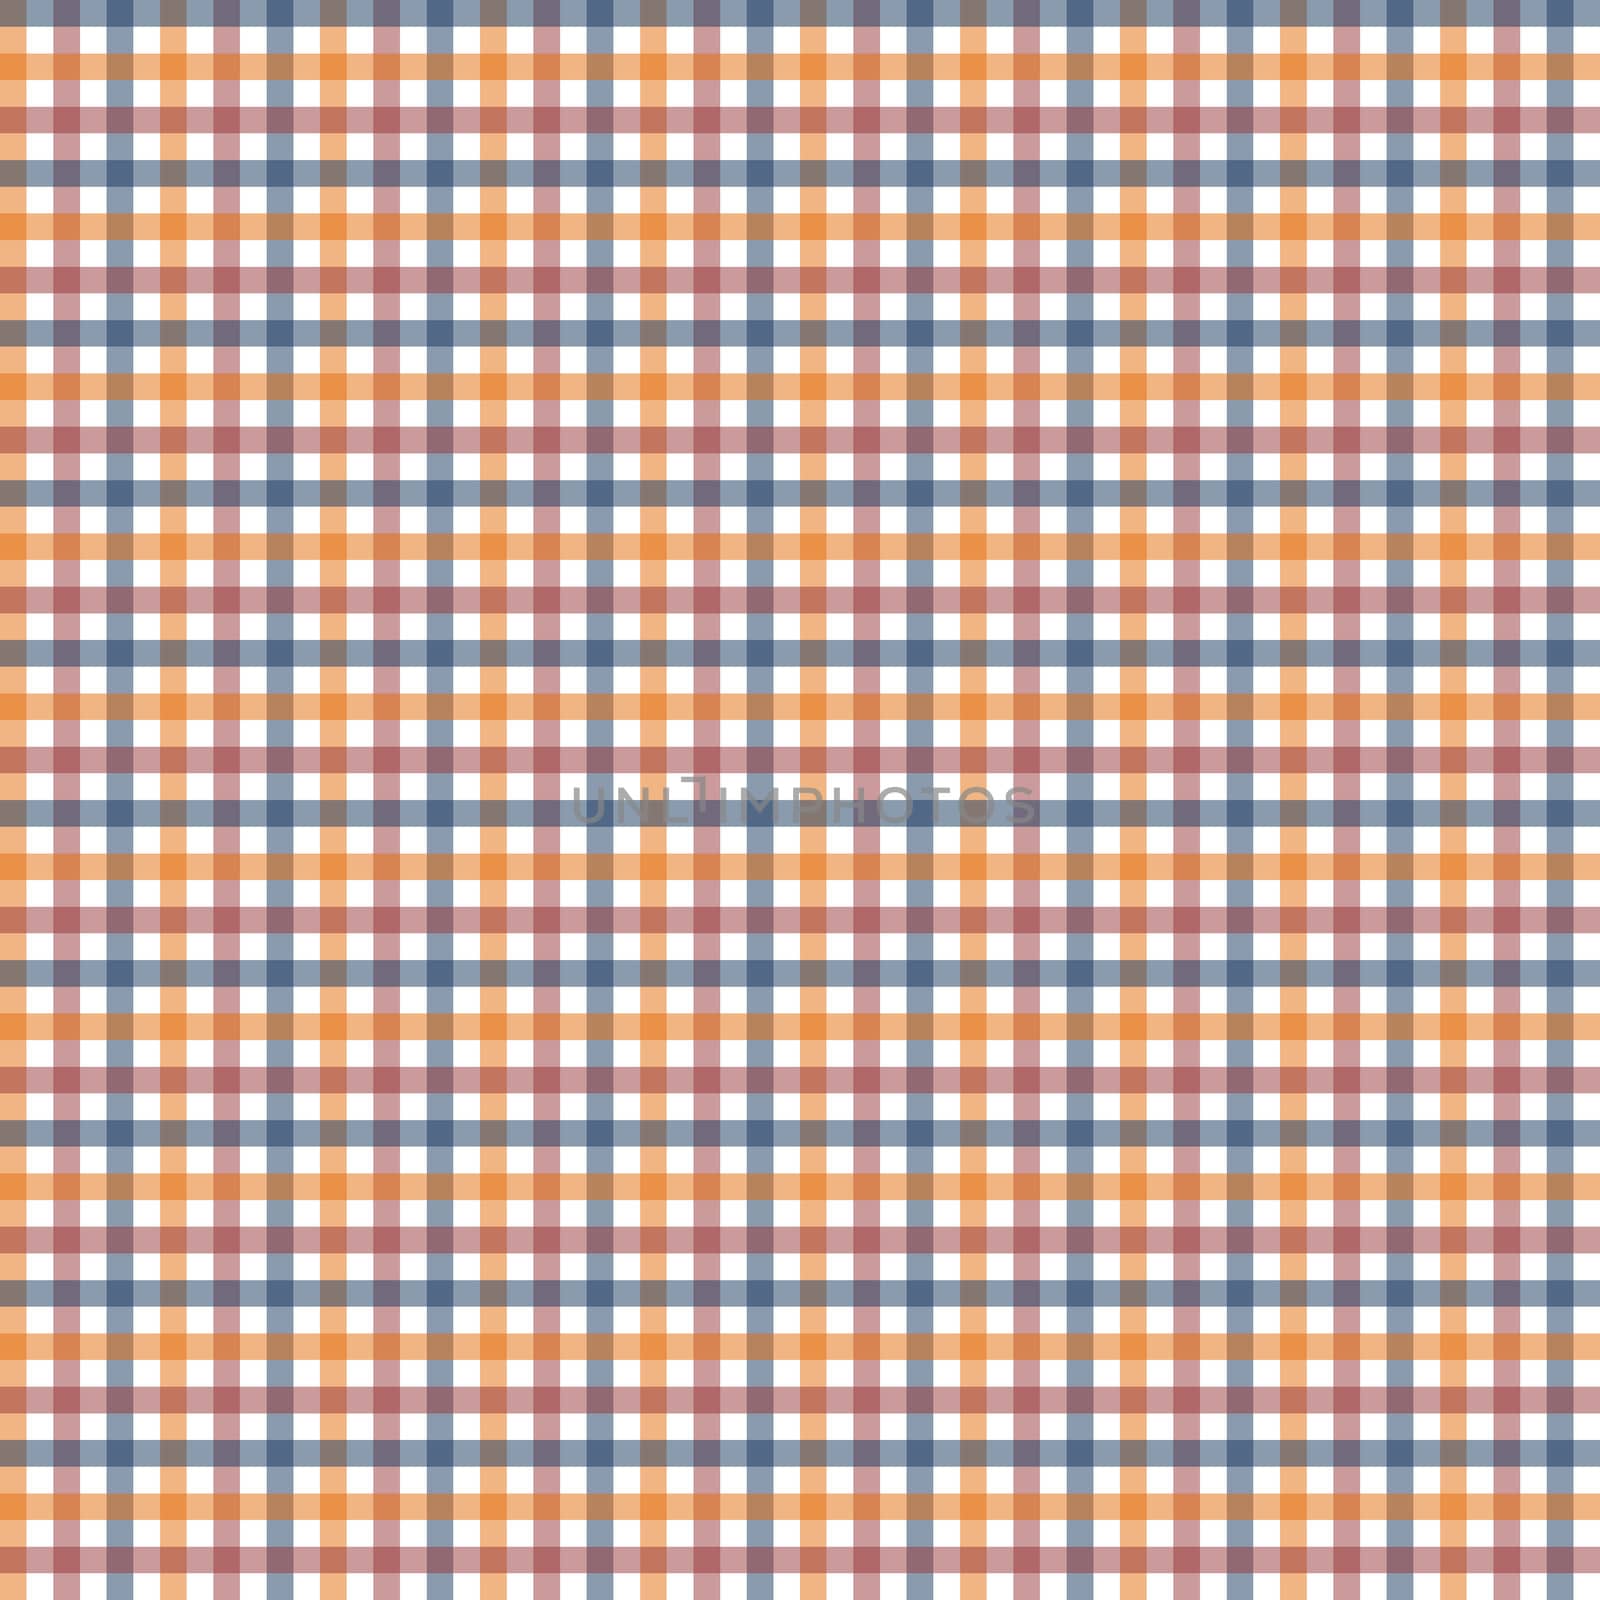 Colorful seamless table cloth pattern as texture